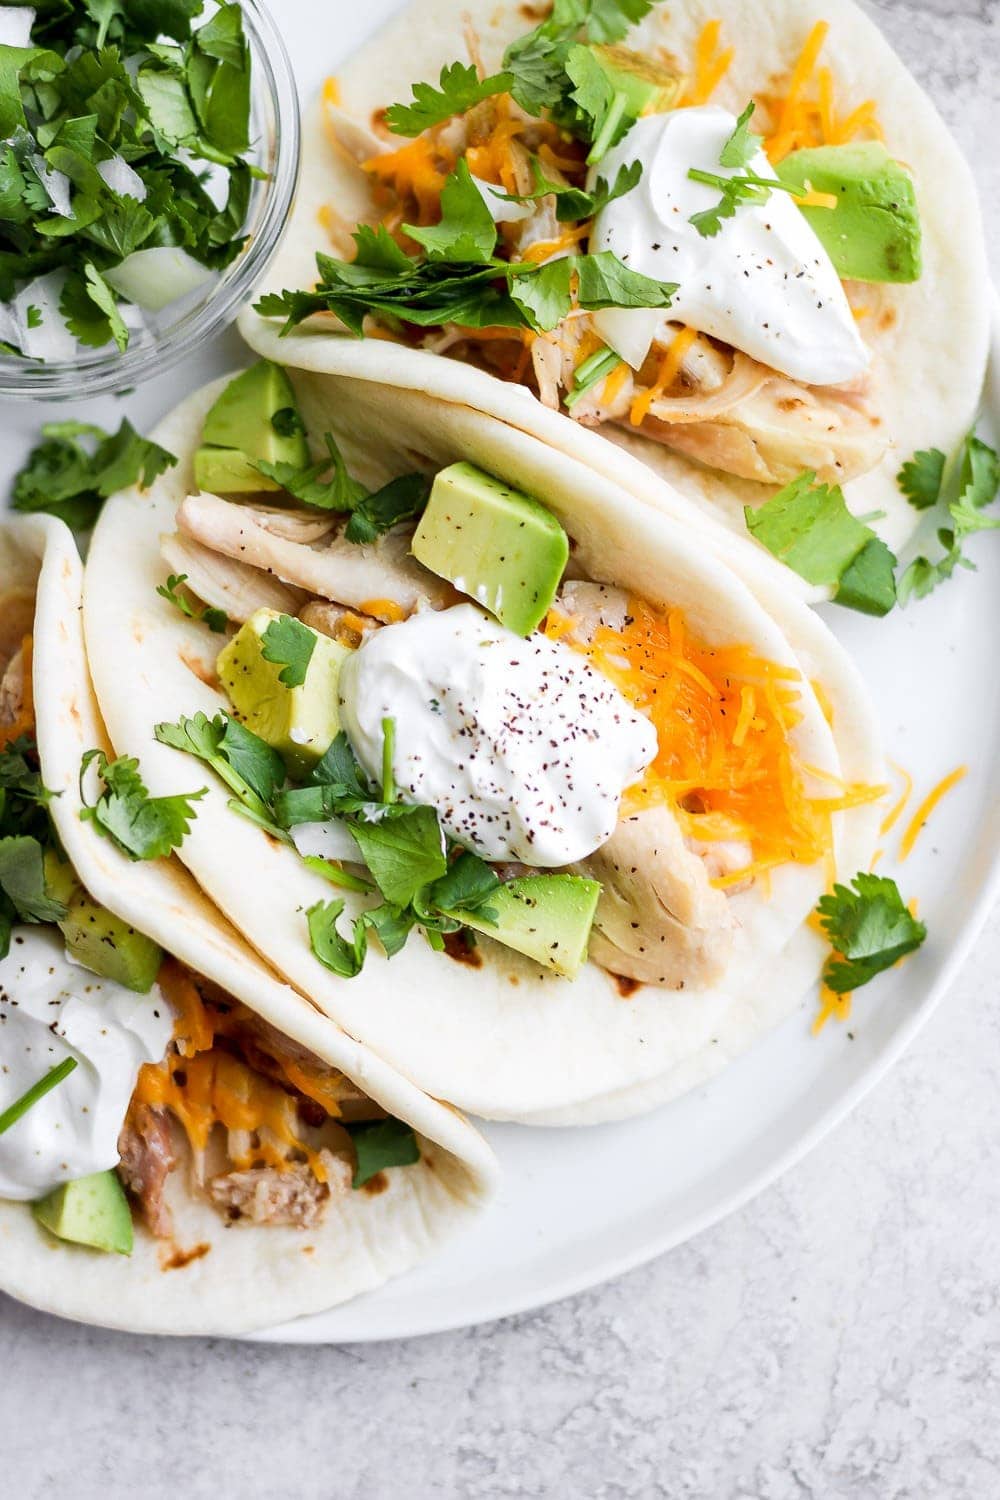 shredded chicken tacos on a plate and ready to be served